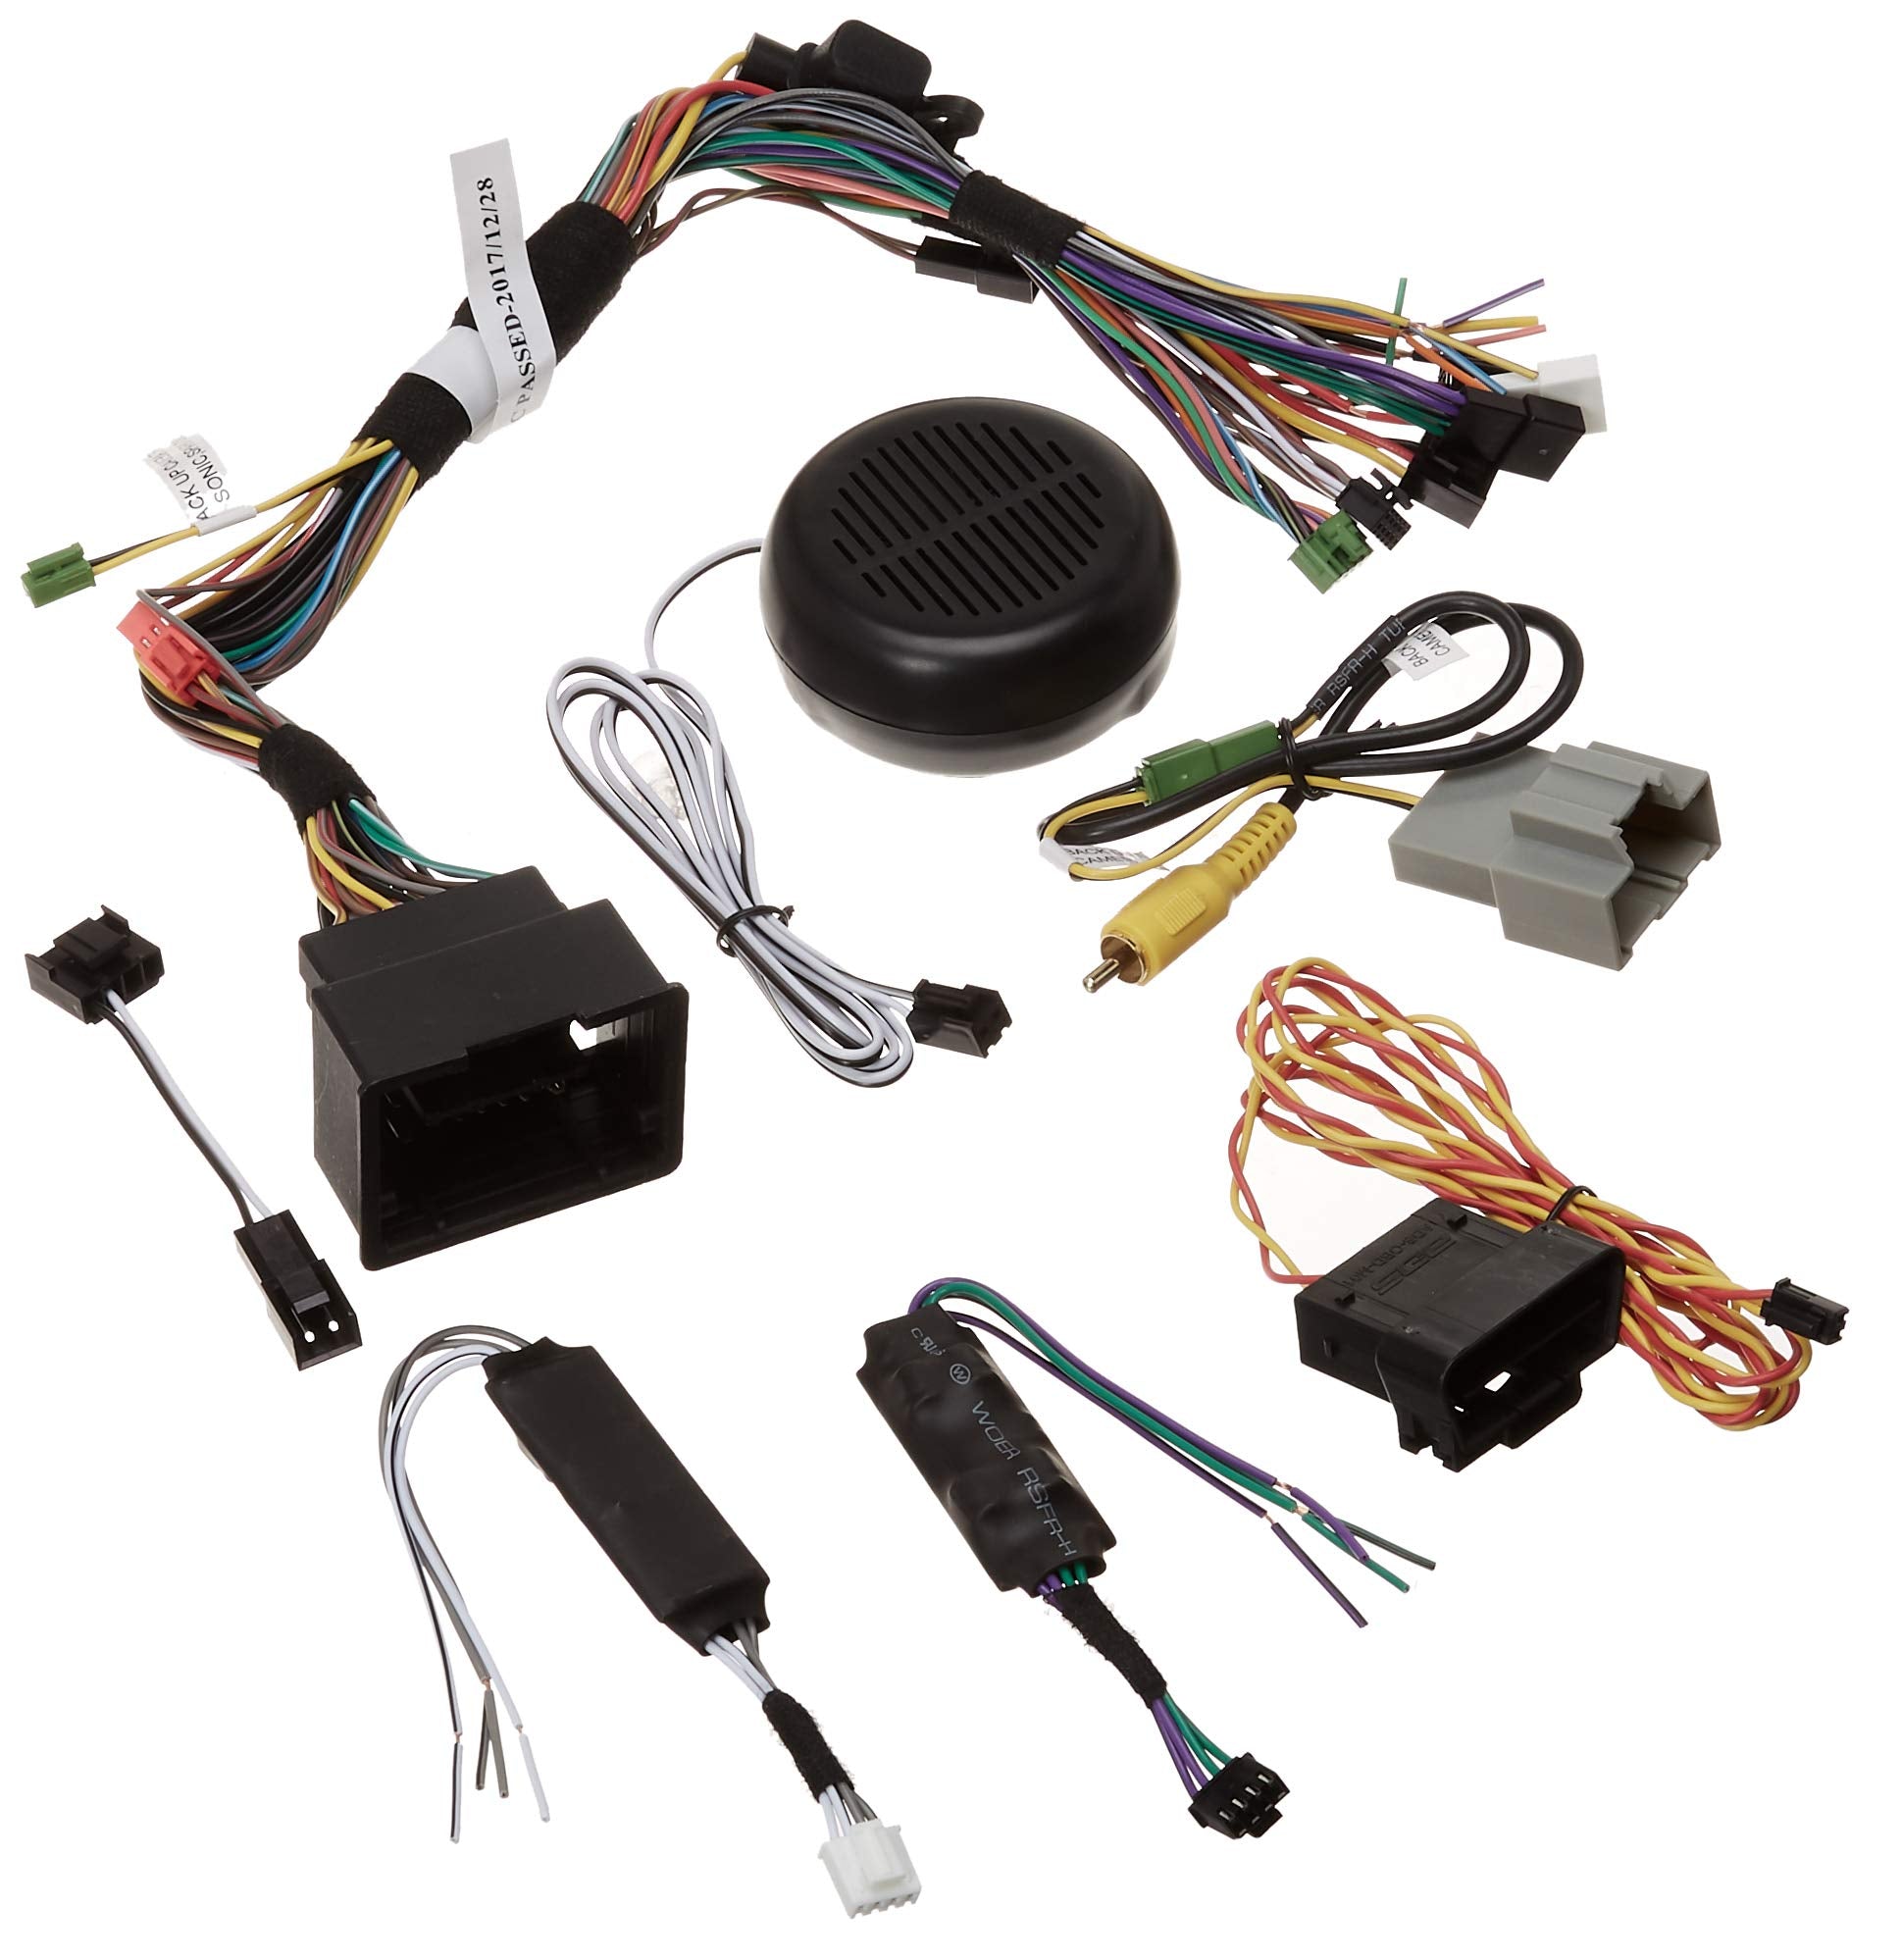 iDatalink HRN-RR-GM2 Interface Harness Connect a new car stereo and retain steering wheel controls, OnStar®,  factory amp, and warning chimes in select 2010-up GM-made vehicles ( ADS-MRR or ADS-MRR2 module also required )